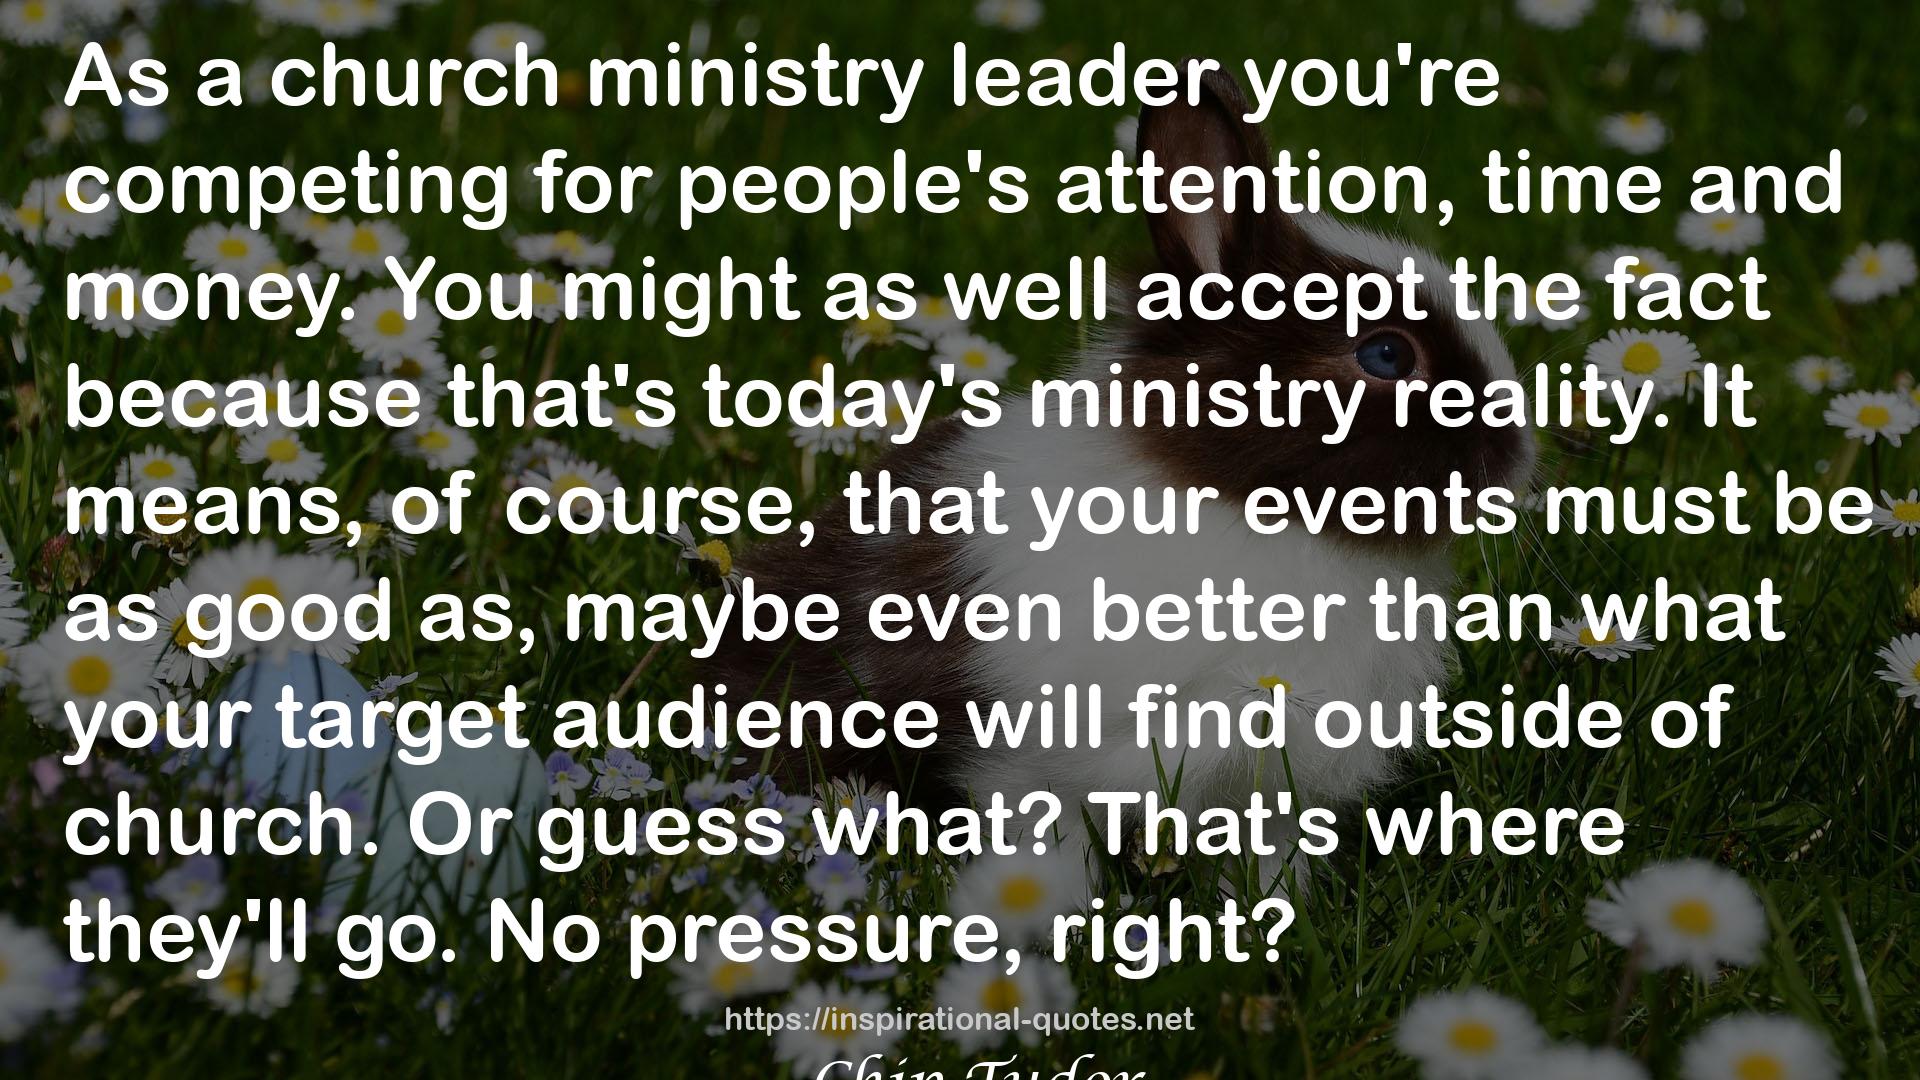 Elements of Internal Church Marketing: Growing Ministry From Inside Out QUOTES